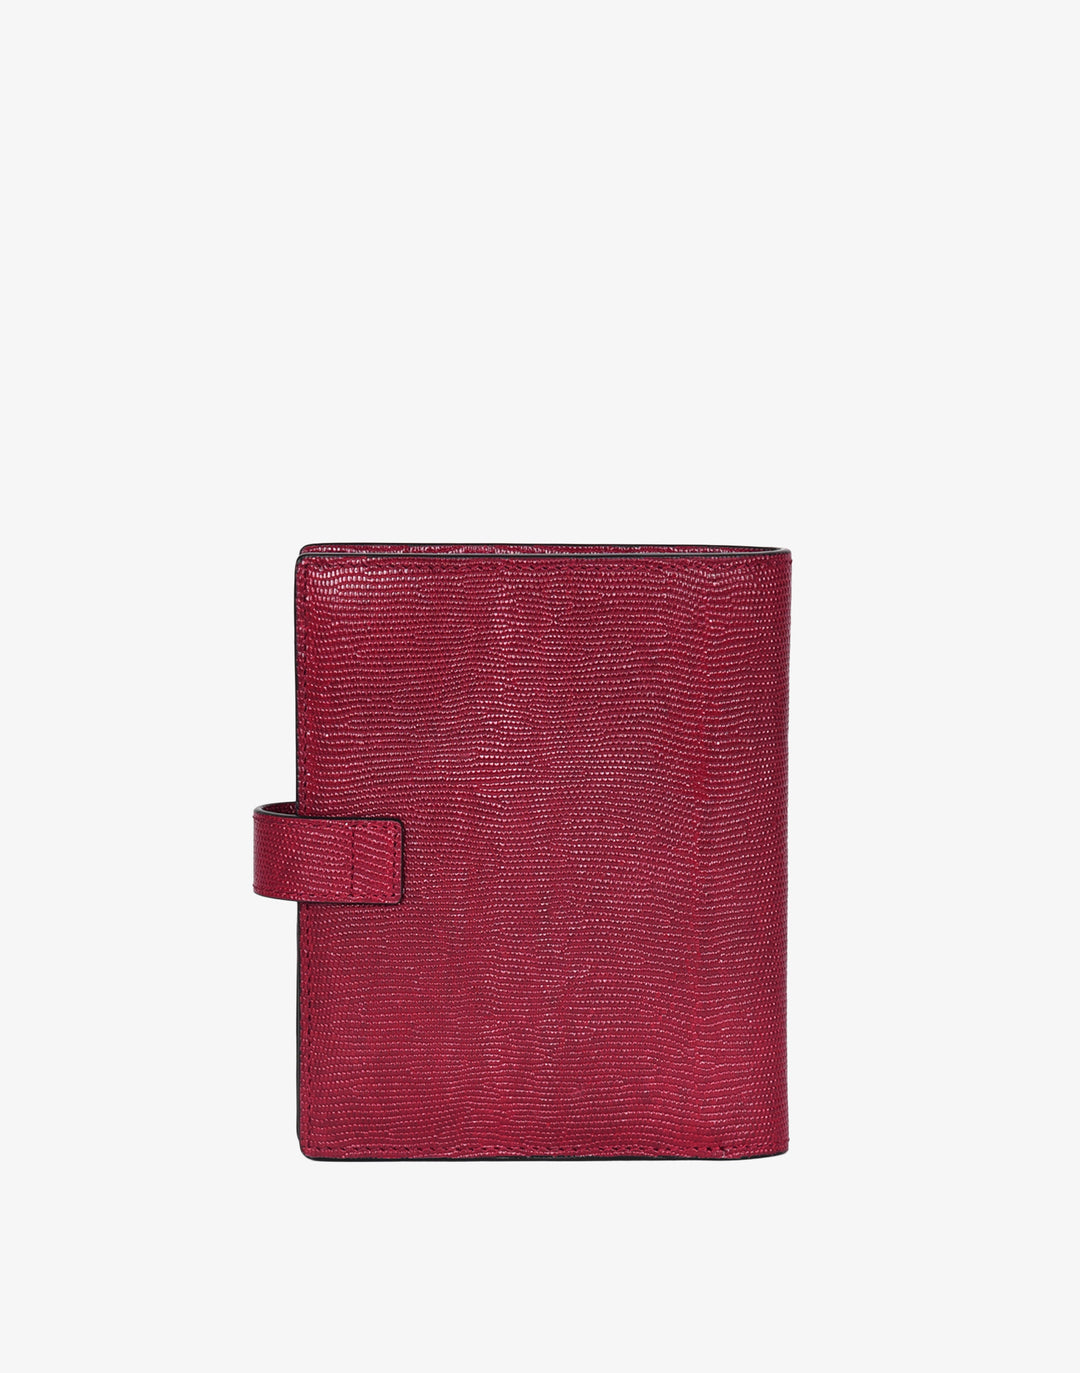 hyer goods recycled leather travel passport wallet with zipper pocket embossed cherry red lizard #color_cherry-red-lizard